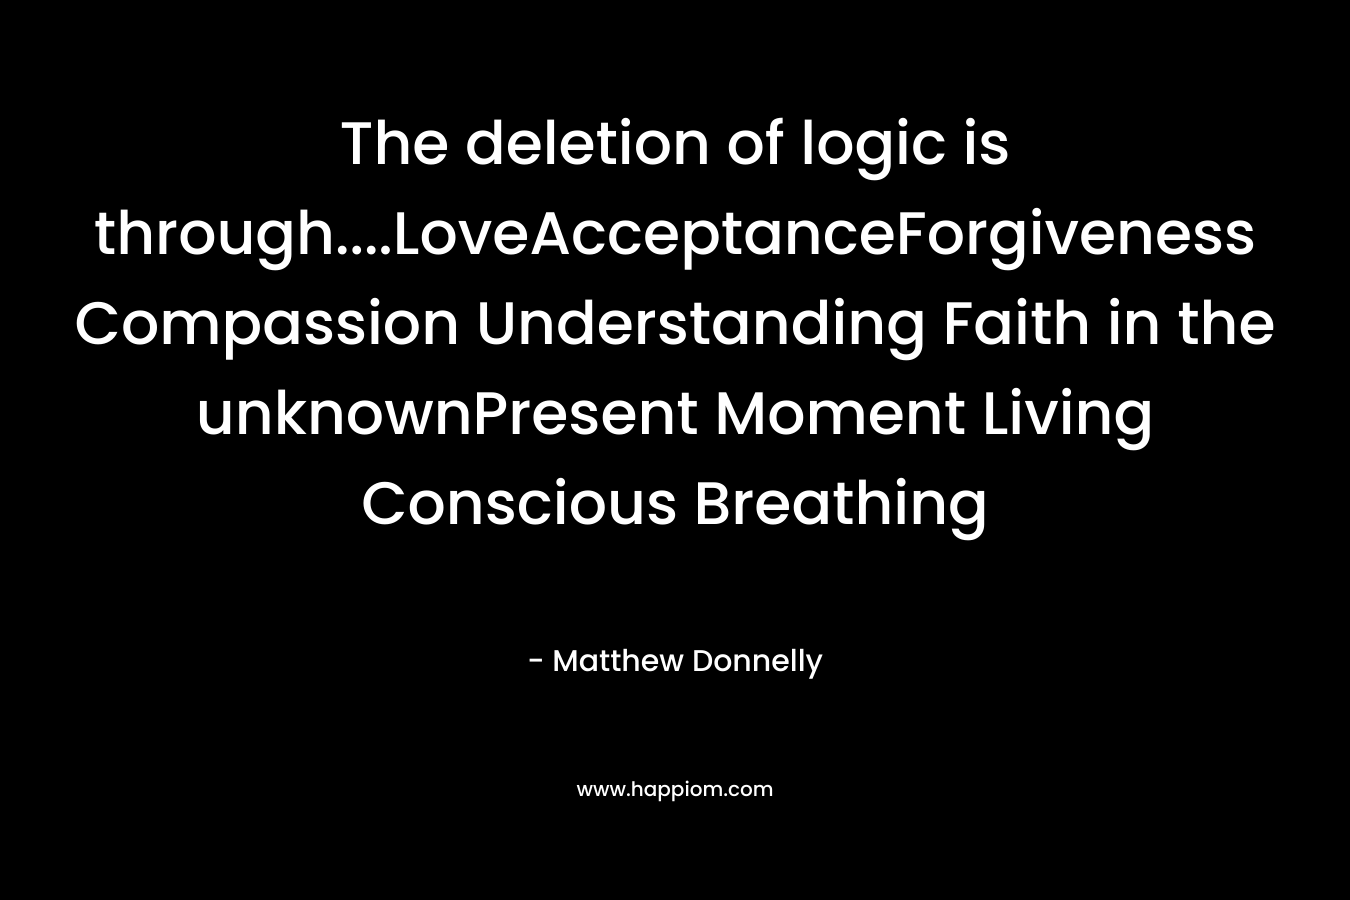 The deletion of logic is through....LoveAcceptanceForgiveness Compassion Understanding Faith in the unknownPresent Moment Living Conscious Breathing